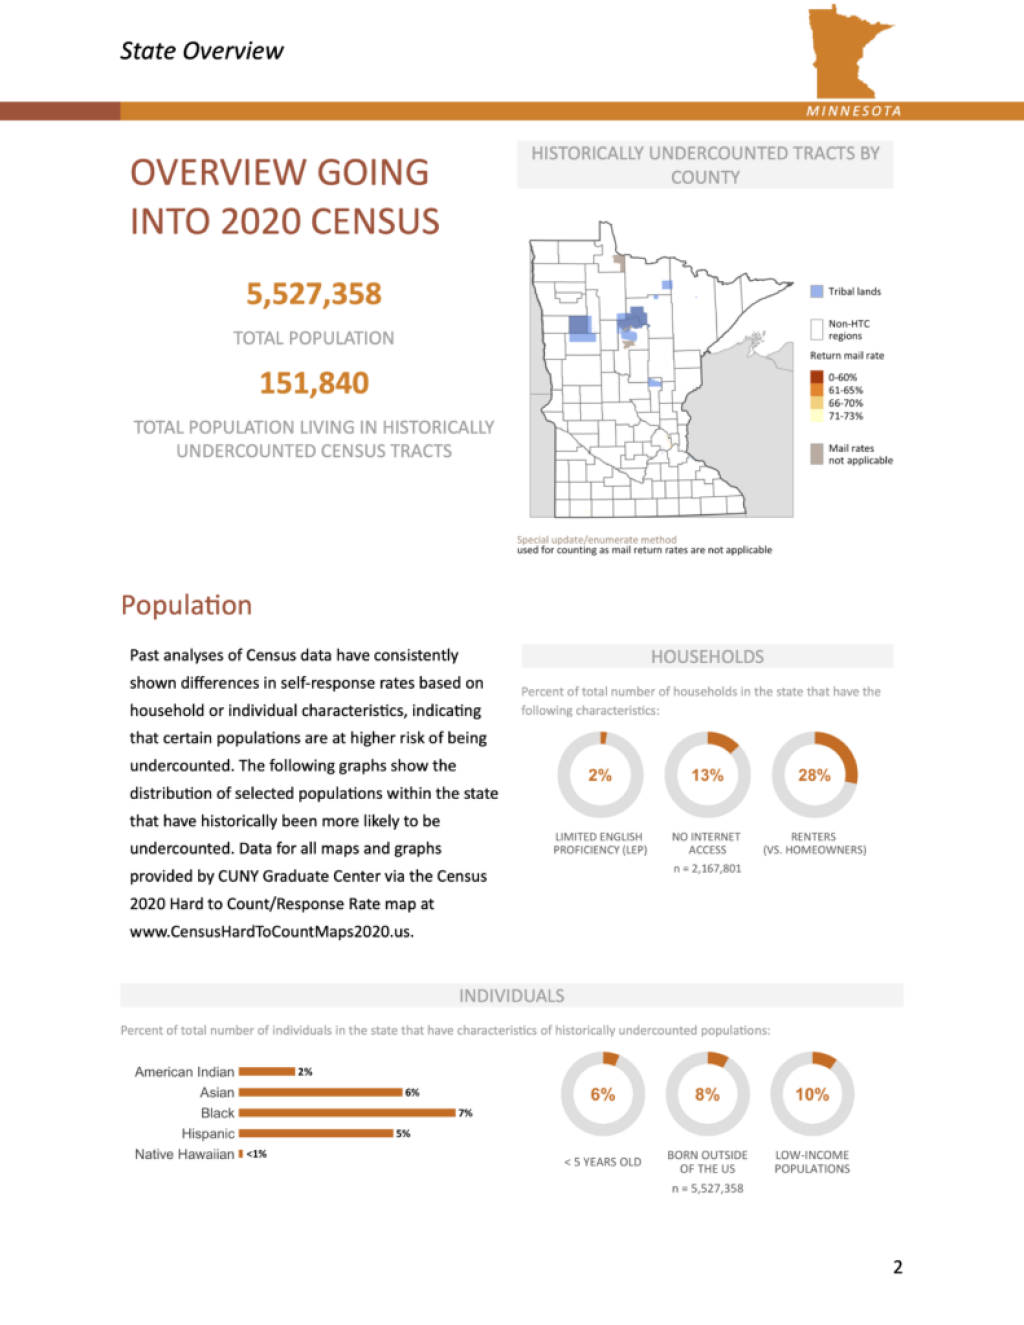 Sample page from reports on 202 Census outreach efforts.